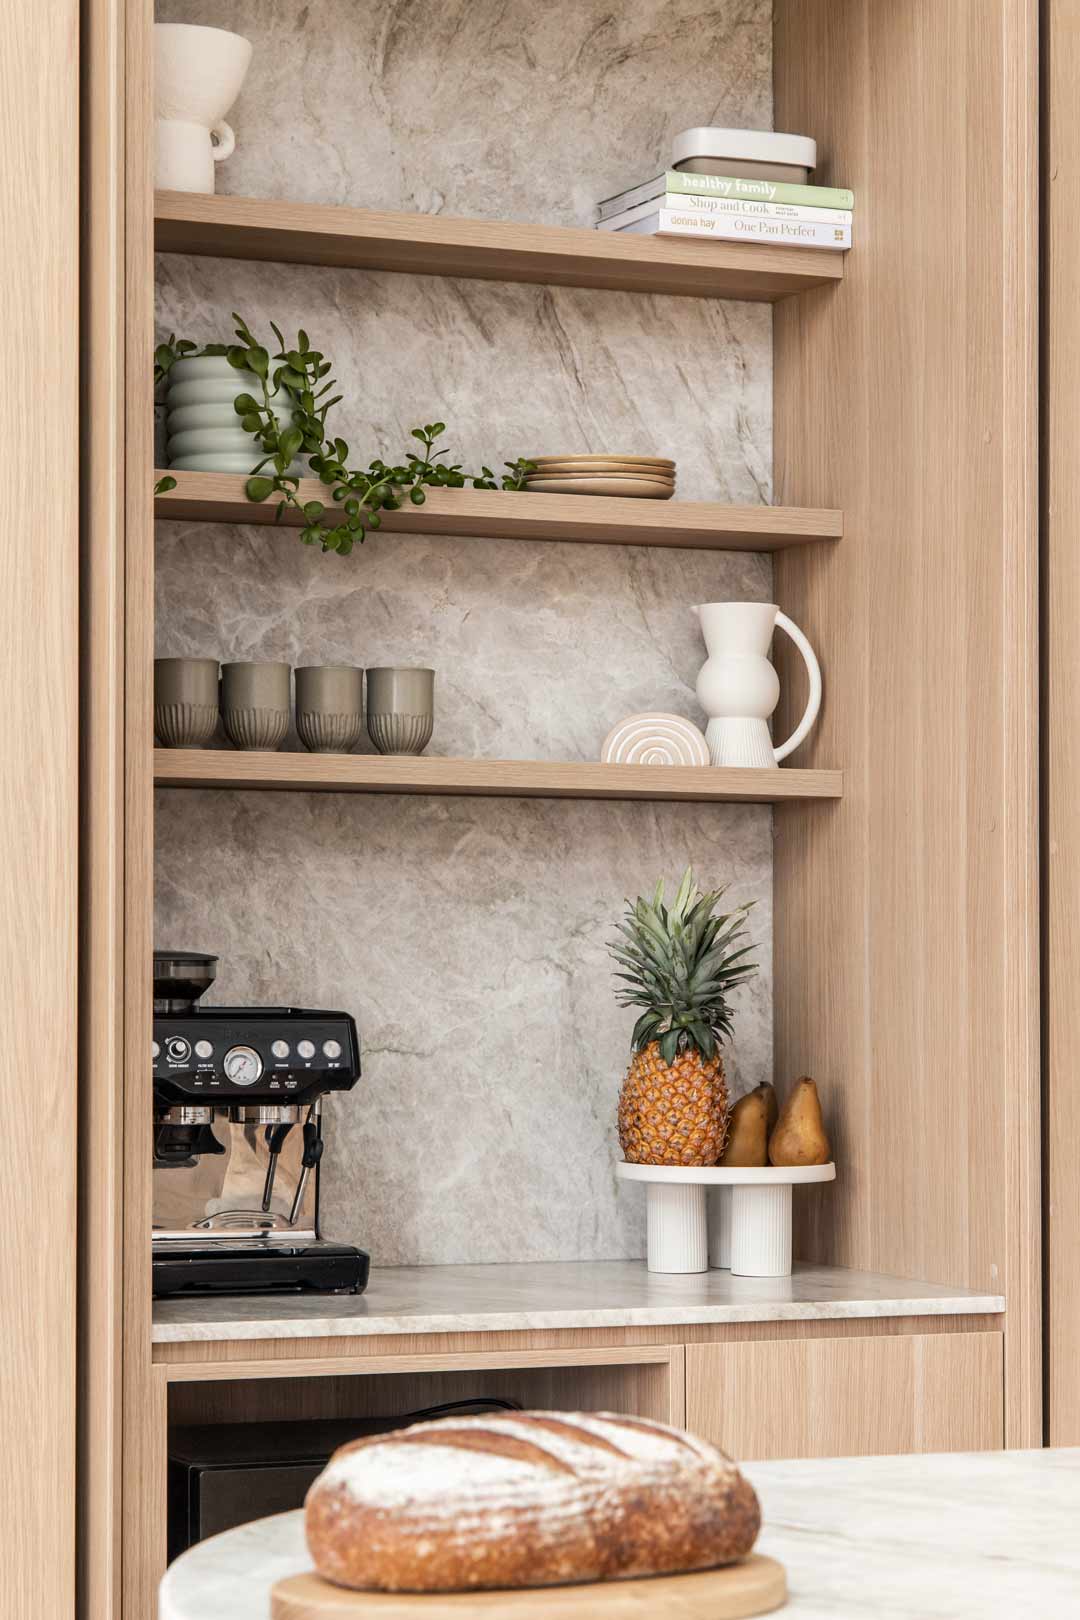 How to Make a Kitchen Coffee Station! - The Inspired Room